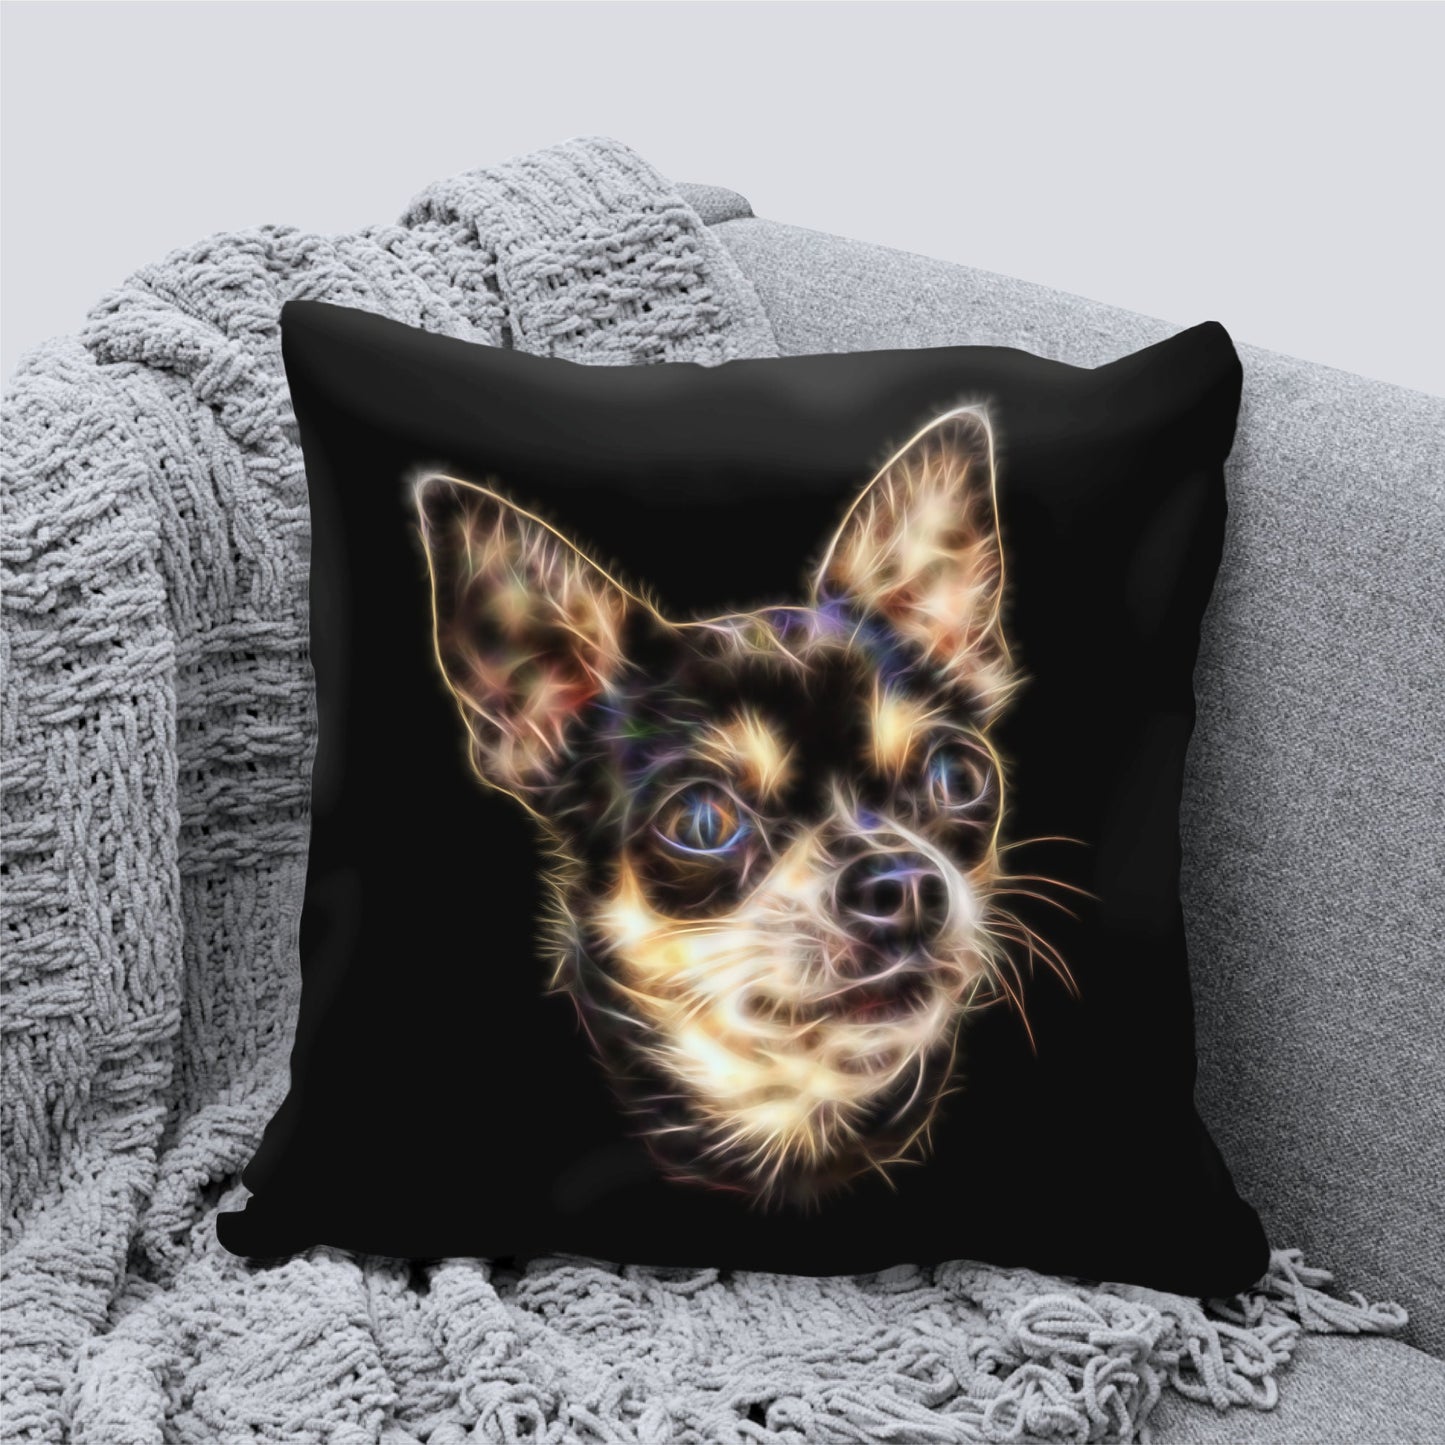 Chocolate and Tan Chihuahua Cushion and Insert